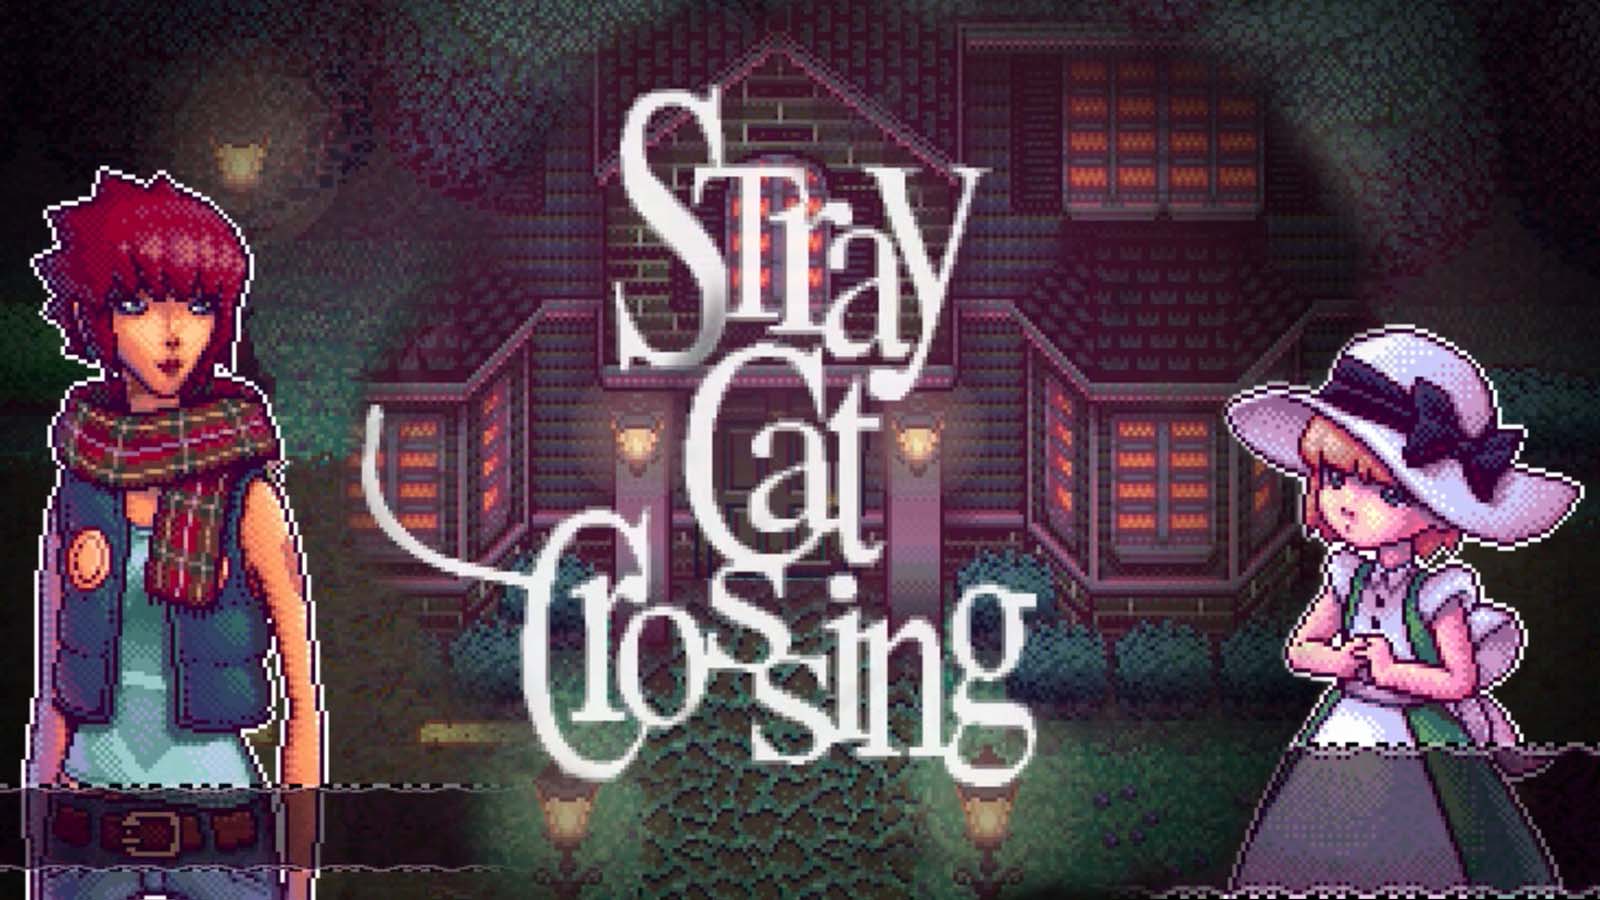 Stray Cat Crossing download epic games